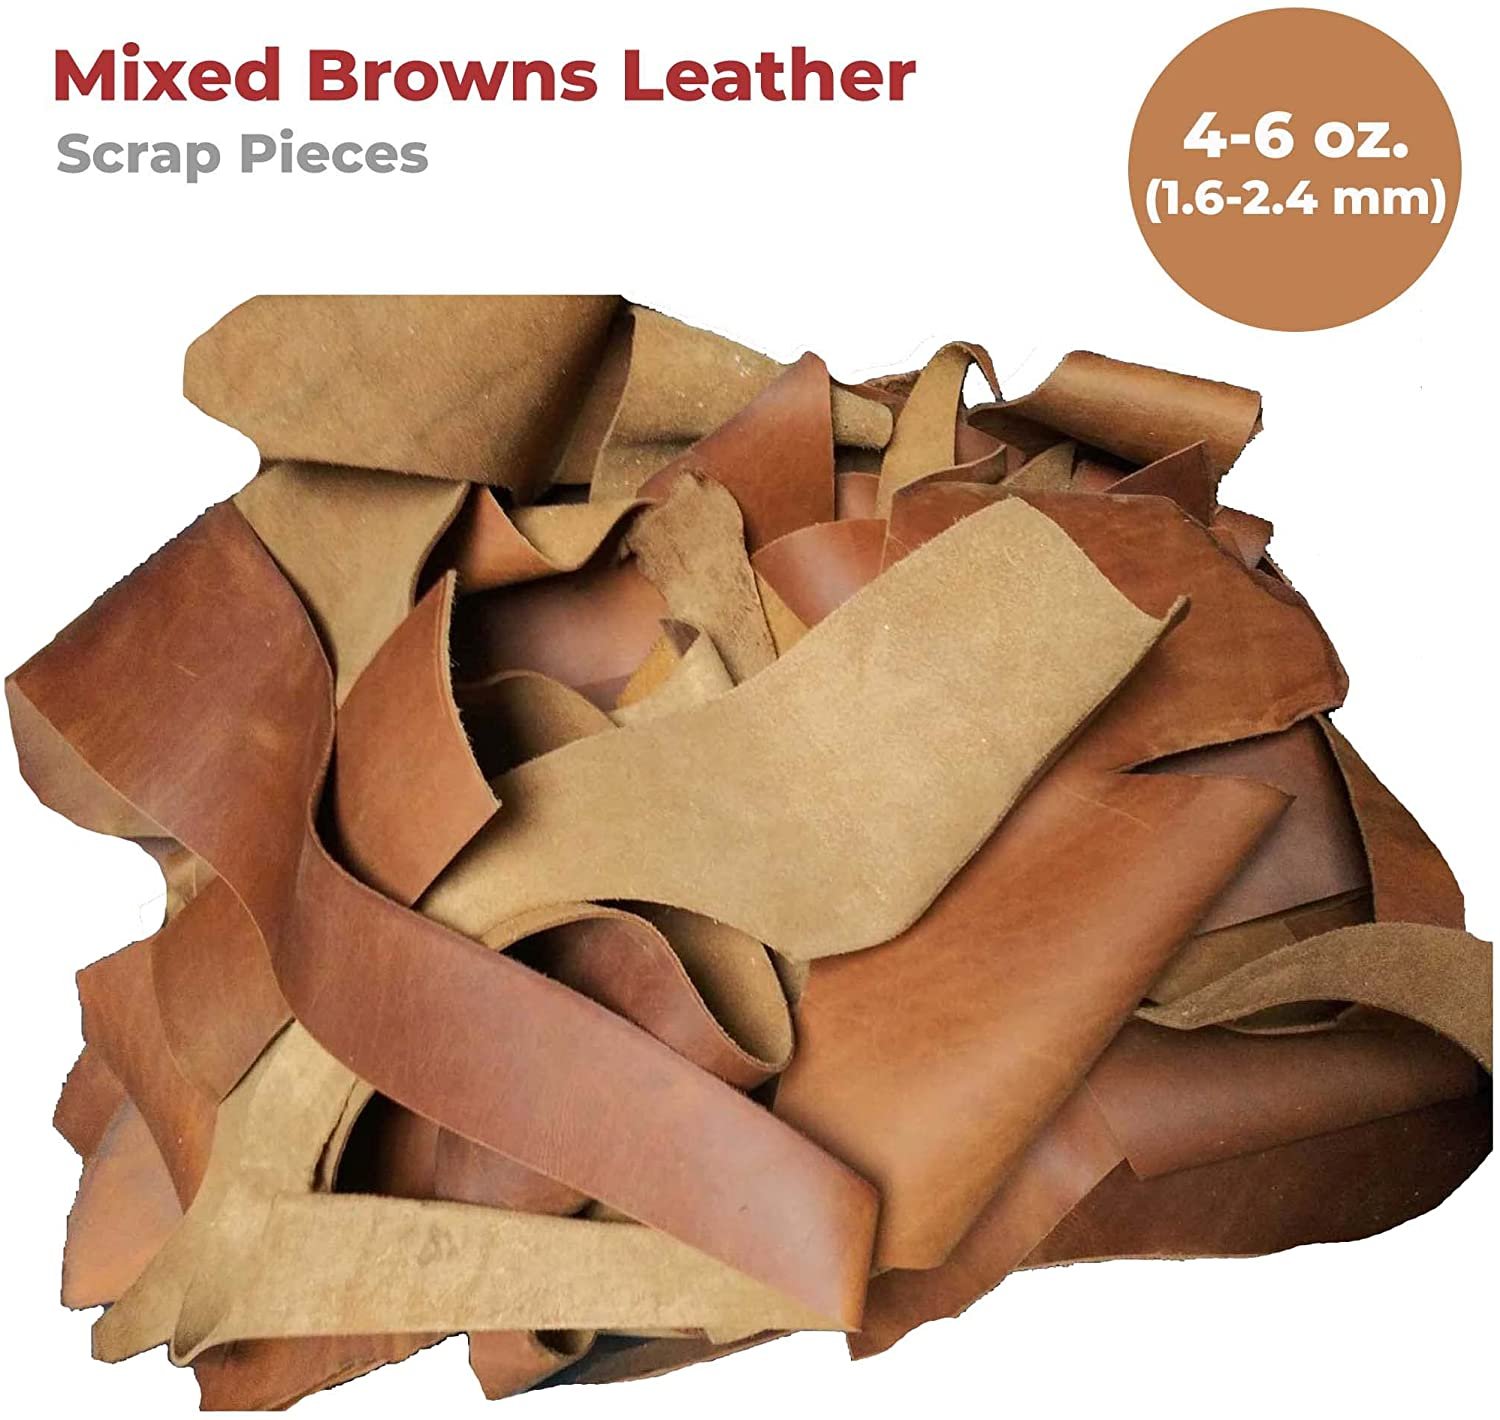 ELW 4-6 oz 1.8-2.4mm Thickness, 10 LB Vegetable Tanned Leather Scraps,  Mixed Brown, Cowhide Remnants Full Grain Leather for Tooling, Holsters,  Knife Sheath, Carving, Embossing, Stamping 